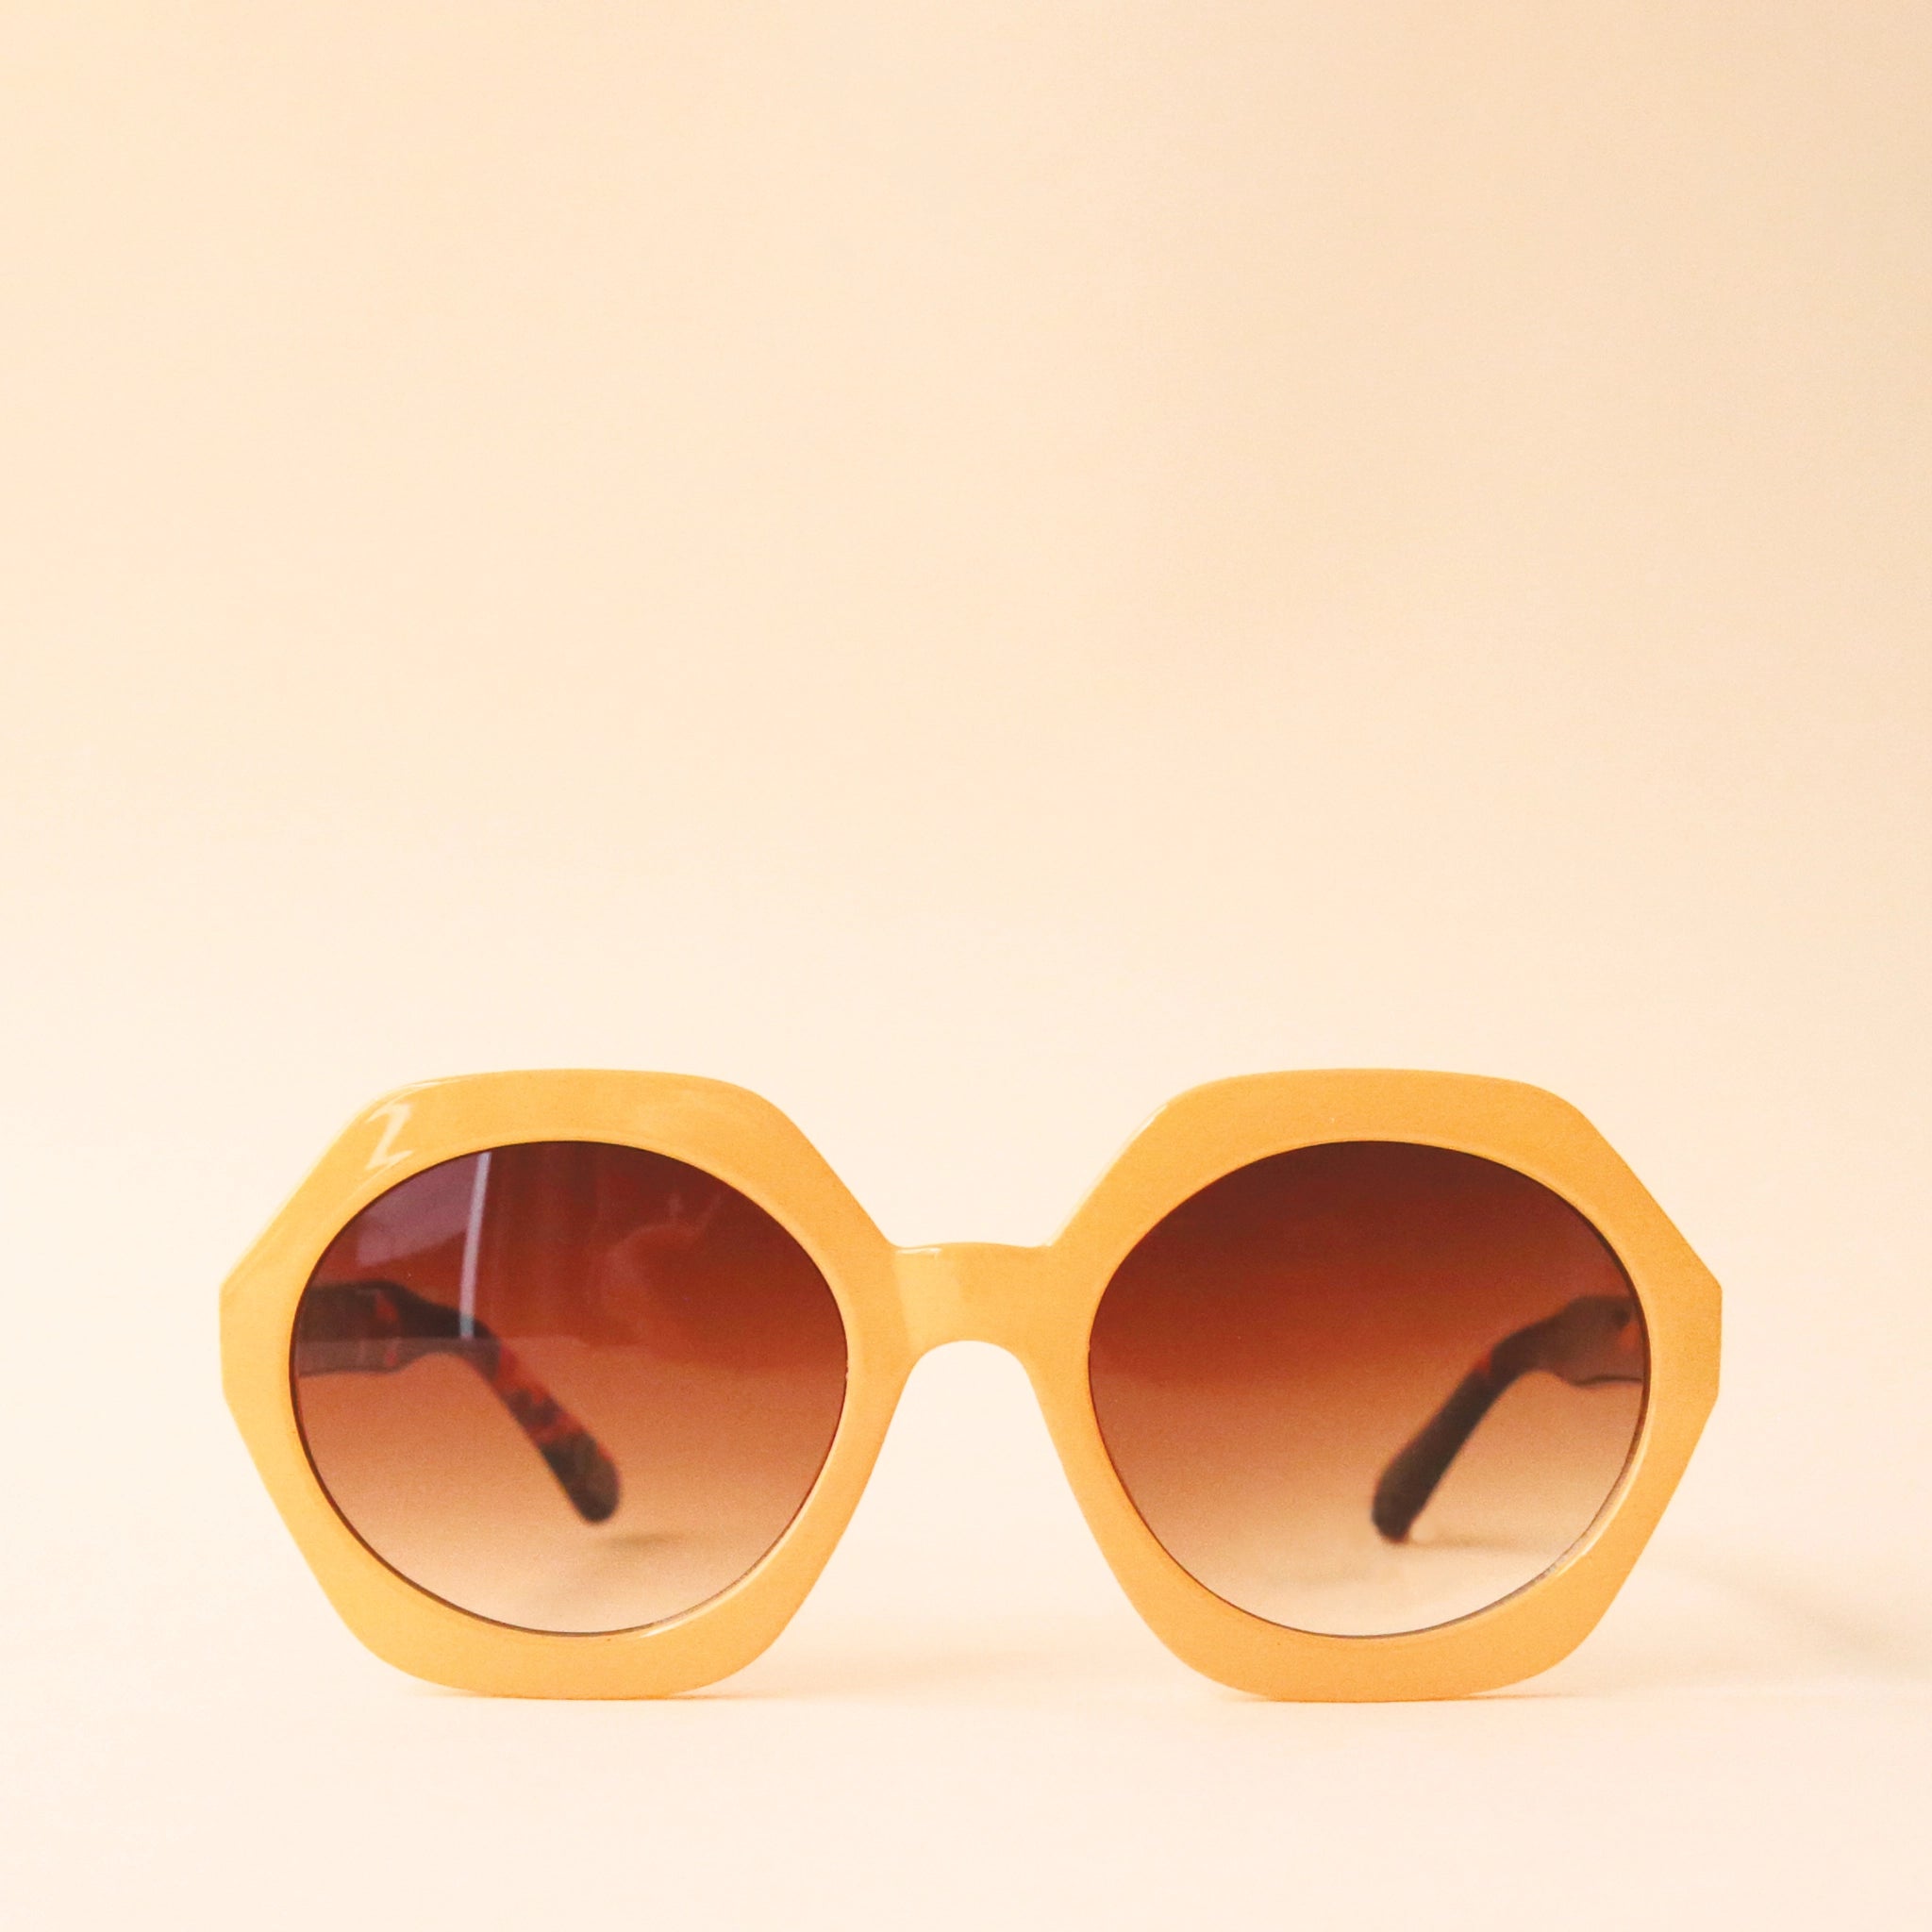 Mustard yellow circular frame sunglasses with a brown lens and tortoise arms photographed in front of a peachy background.